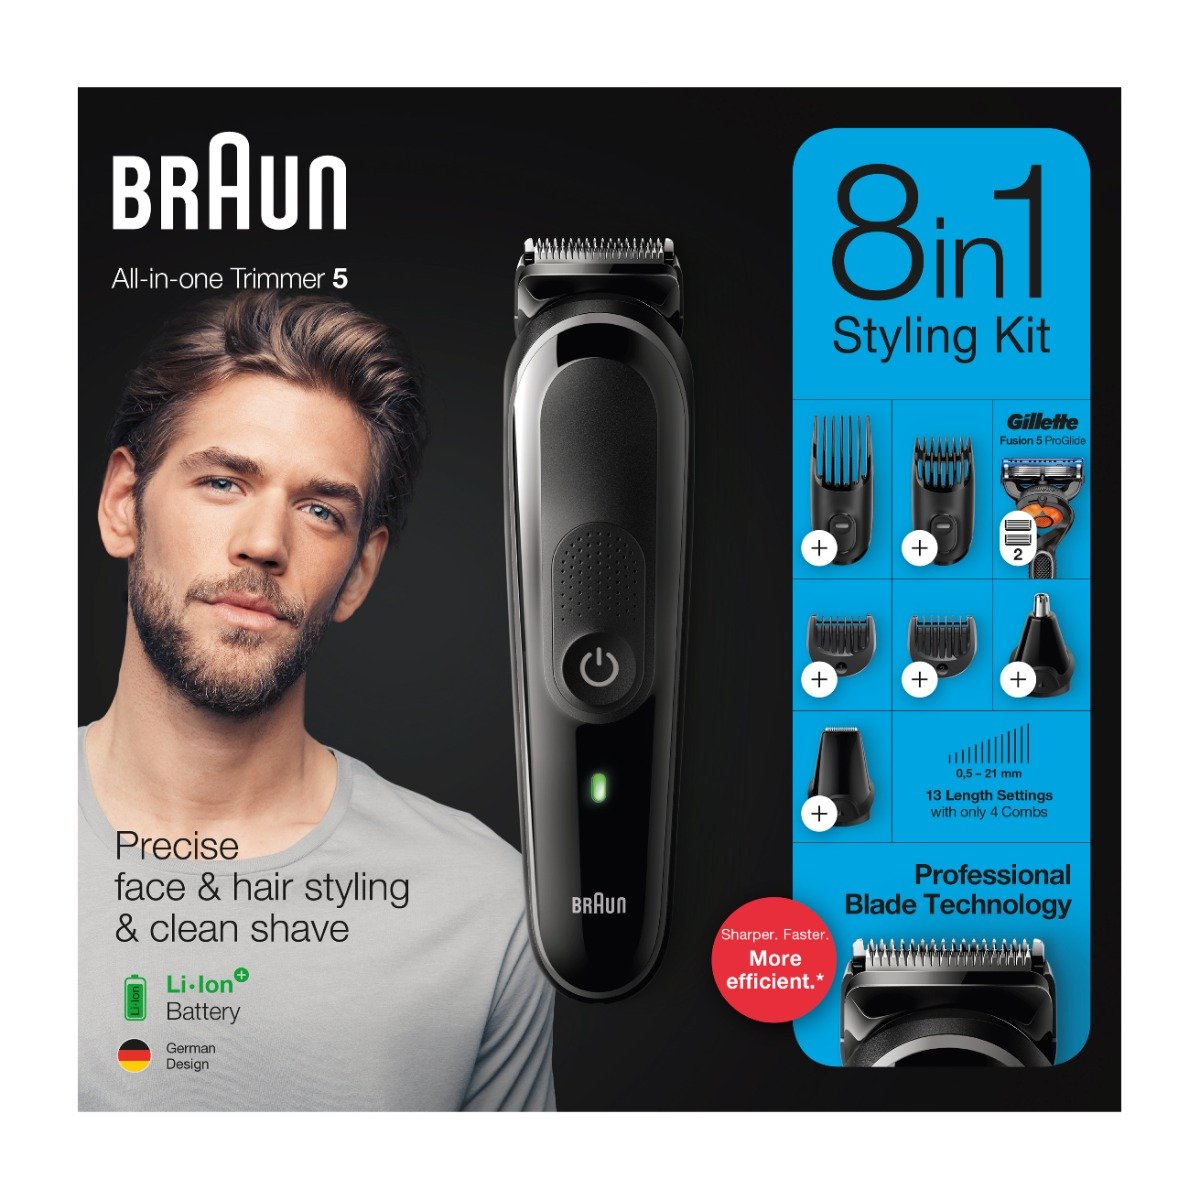 Braun All-In-One Trimmer (5) 8 in 1 Styling Kit - MGK5260 - Bloom Pharmacy